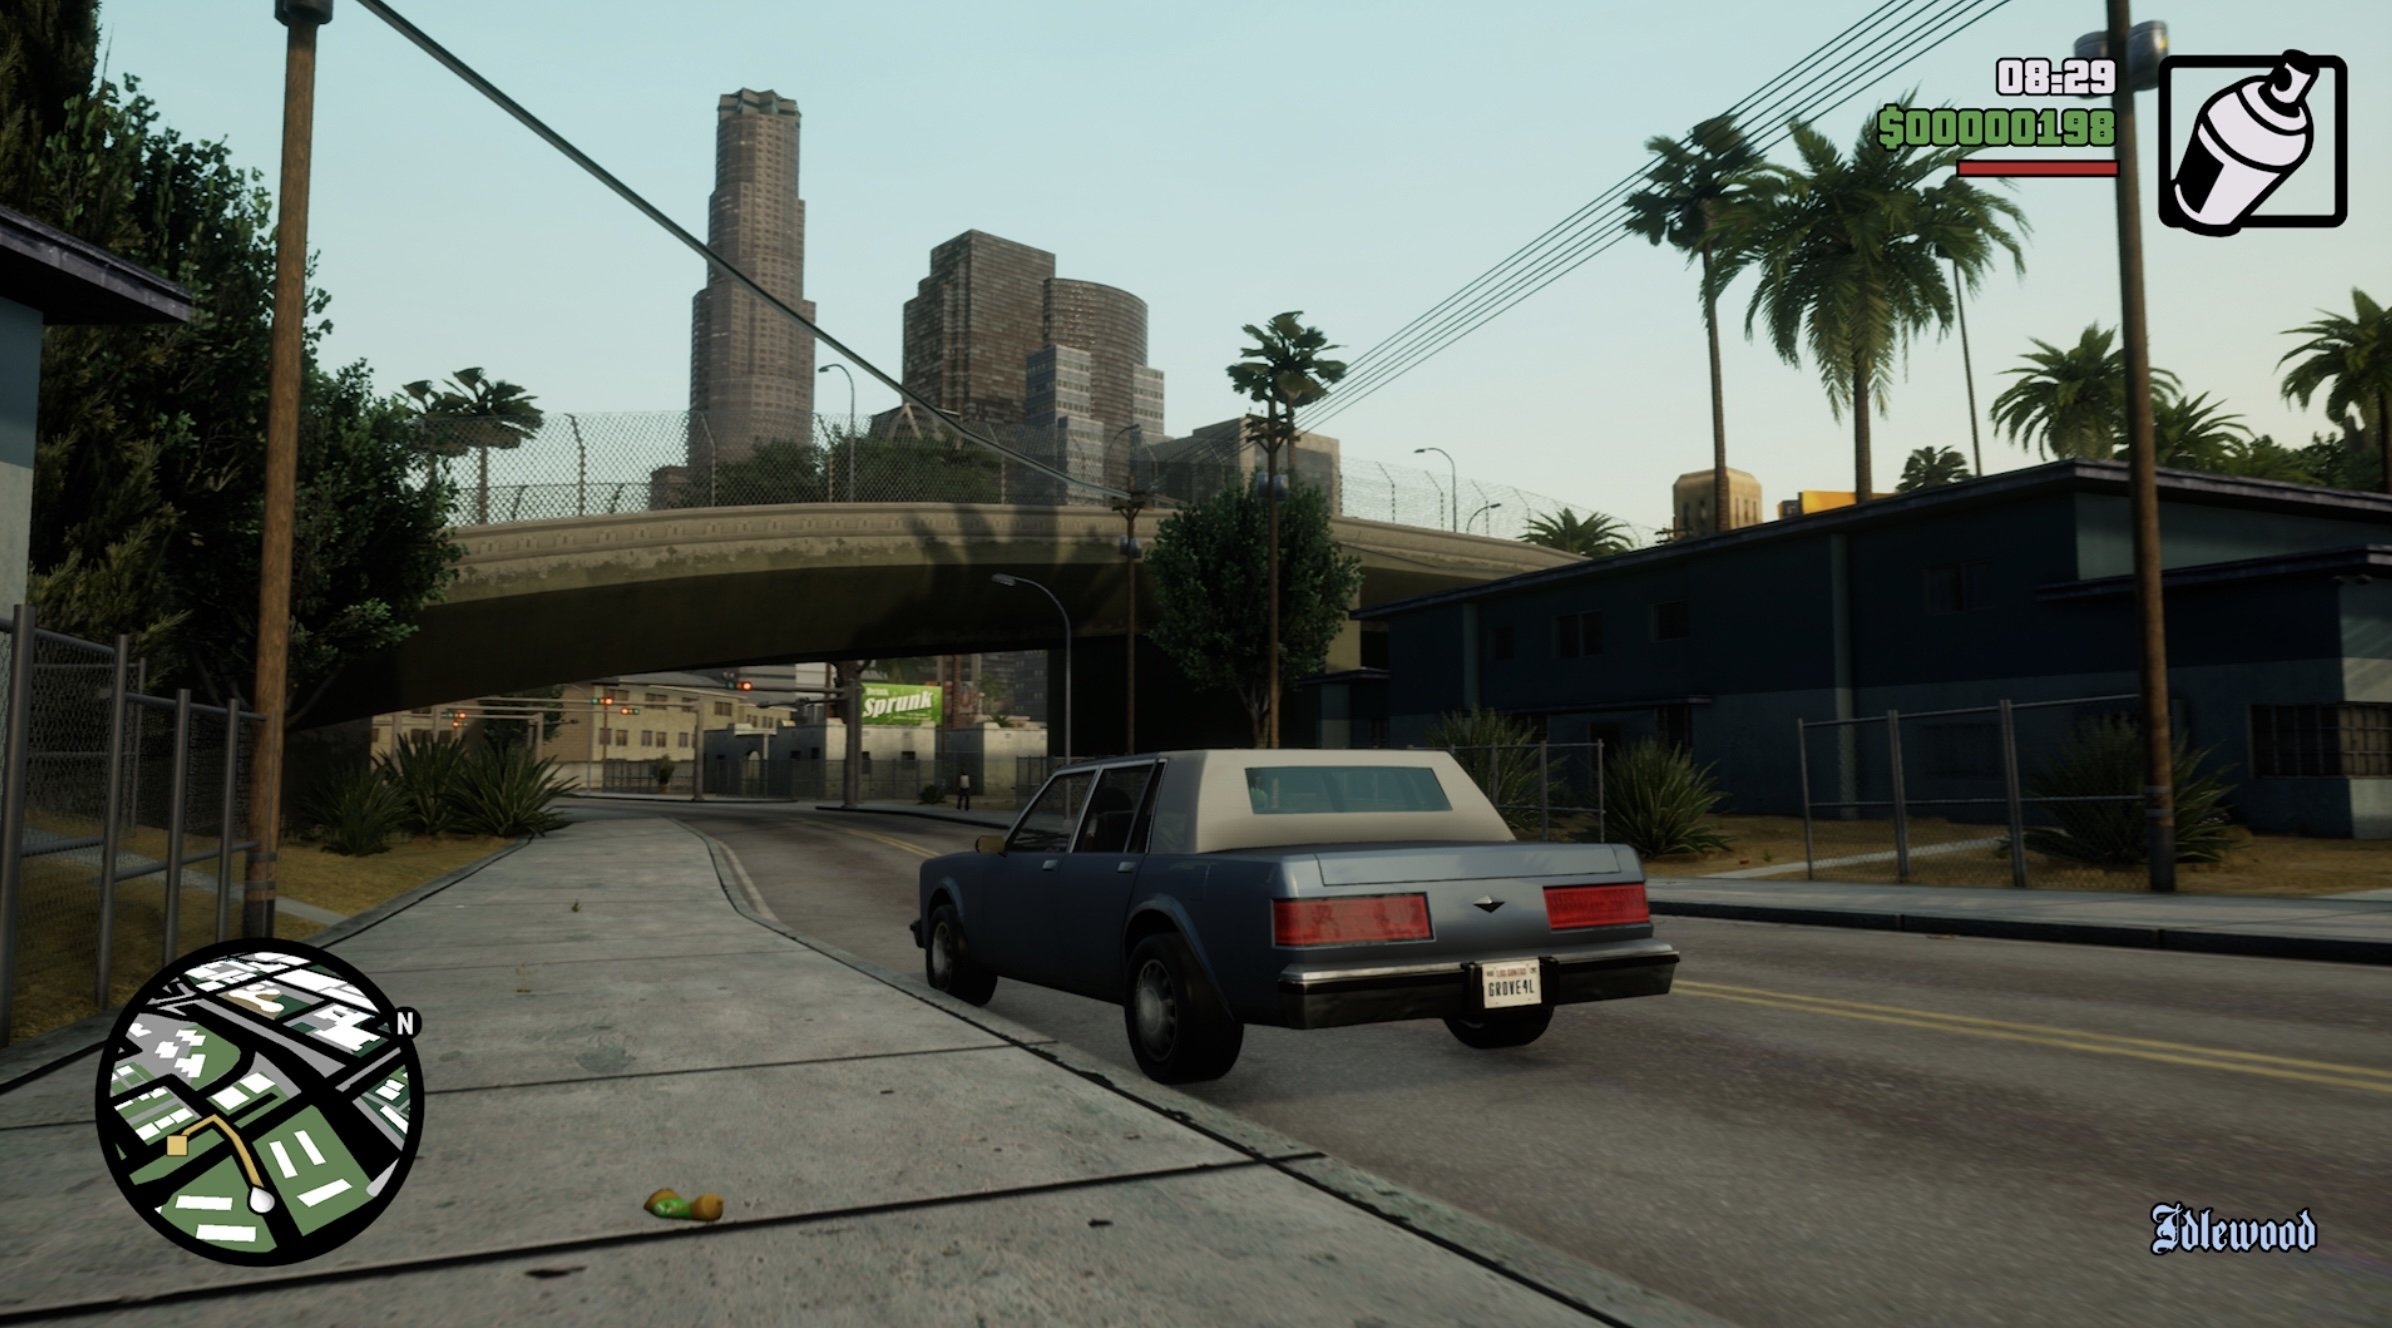 Being able to see the skyscrapers from the Grove Street surely feels good and immersive, but it should have been handled better, especially when the player is above ground. (Screenshot by Emre Başaran)